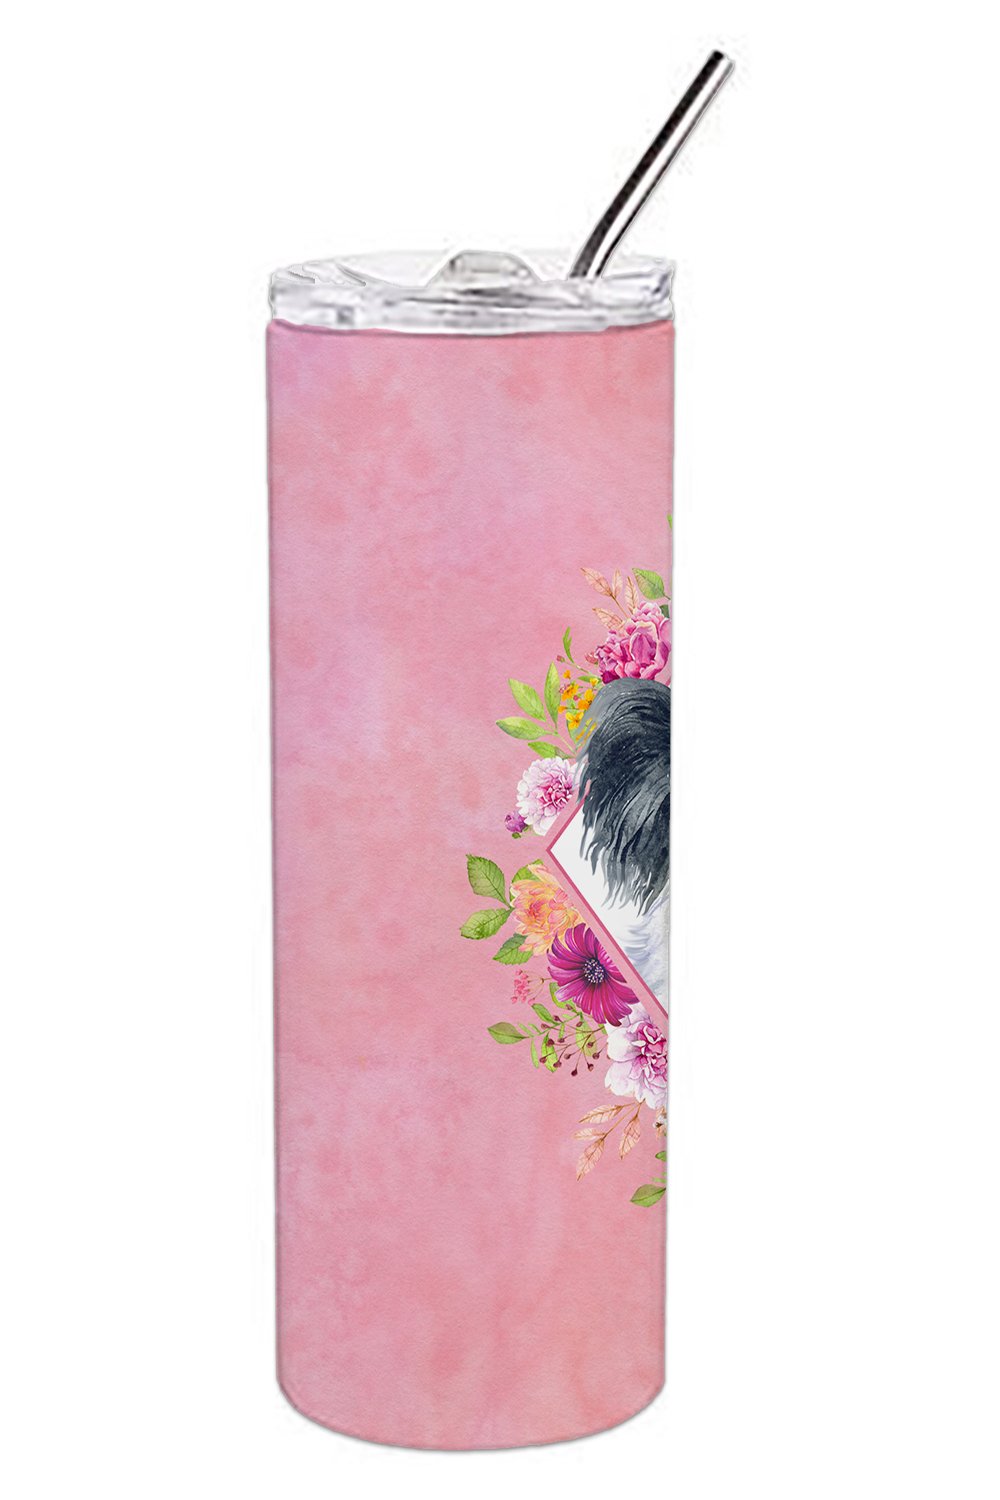 Papillon Pink Flowers Double Walled Stainless Steel 20 oz Skinny Tumbler CK4165TBL20 by Caroline's Treasures